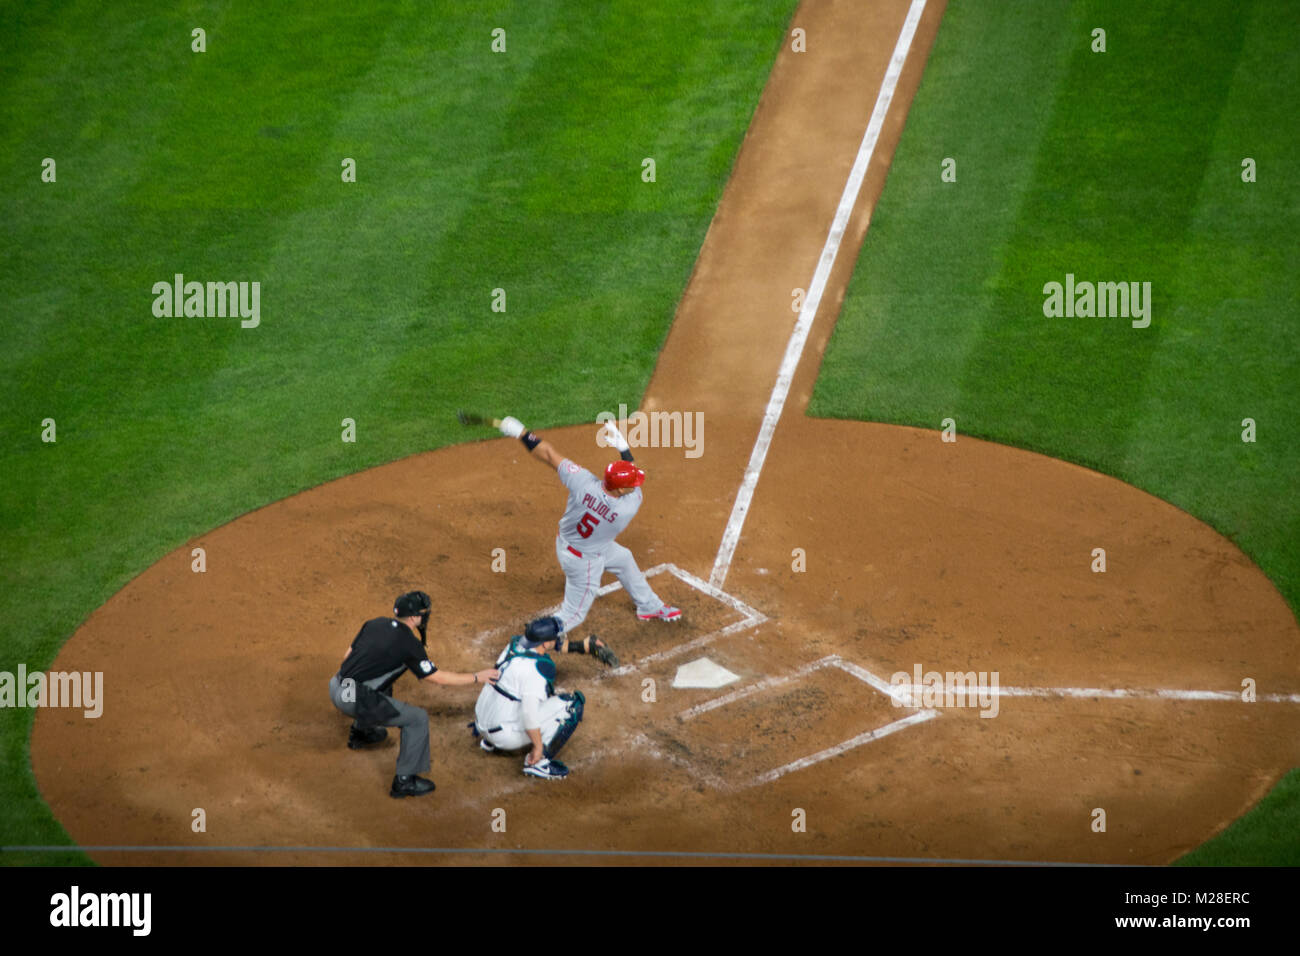 Albert Pujols from the Los Angeles Angels swings at a pitch during a game against the Seattle Mariners. Stock Photo